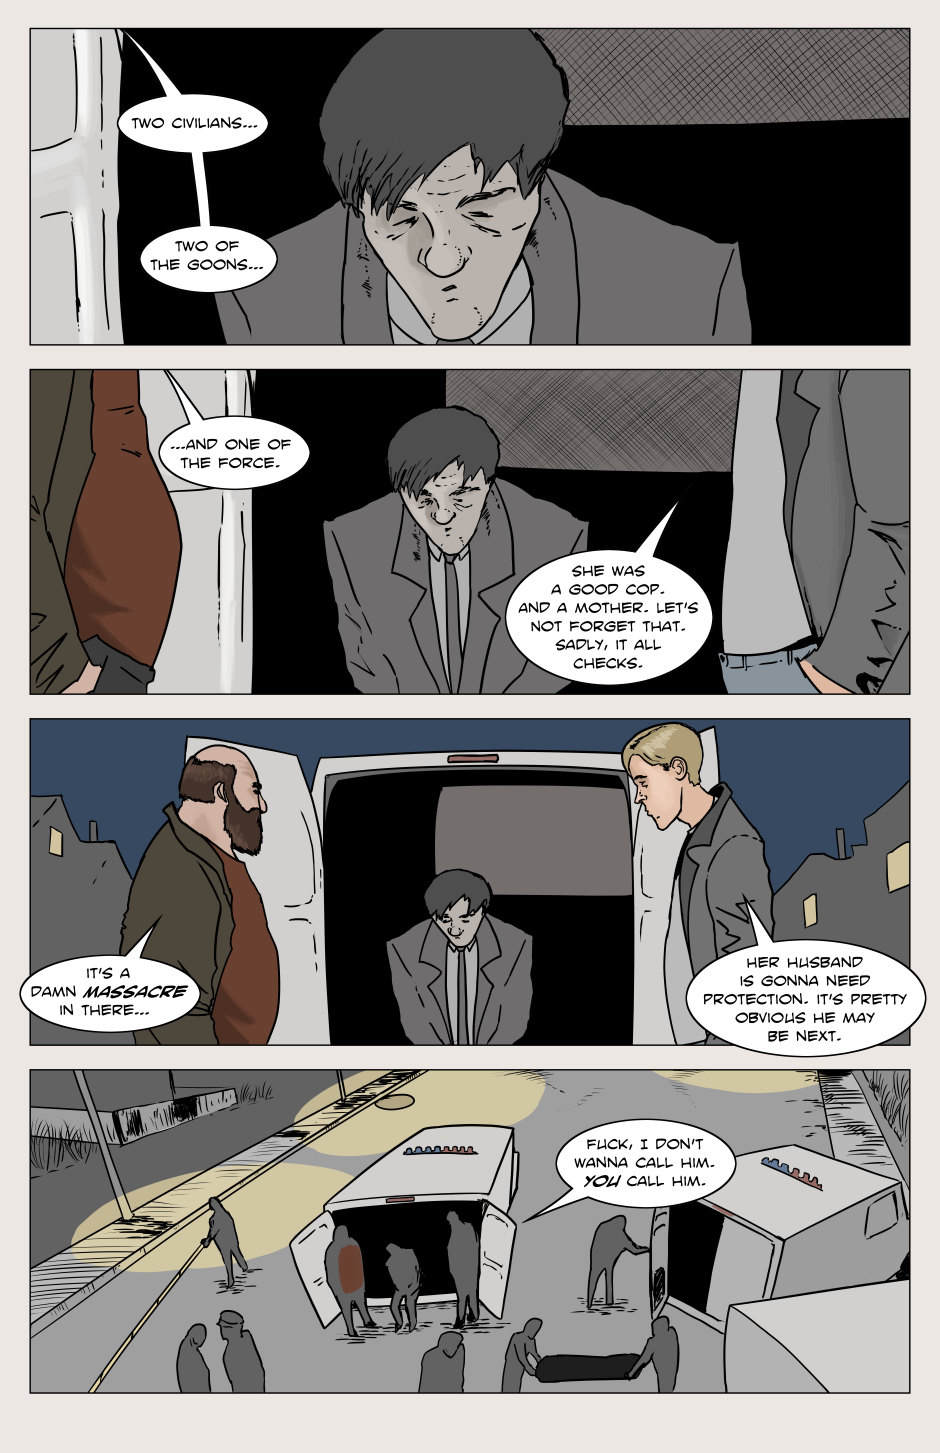 The Frolic #6, page 21